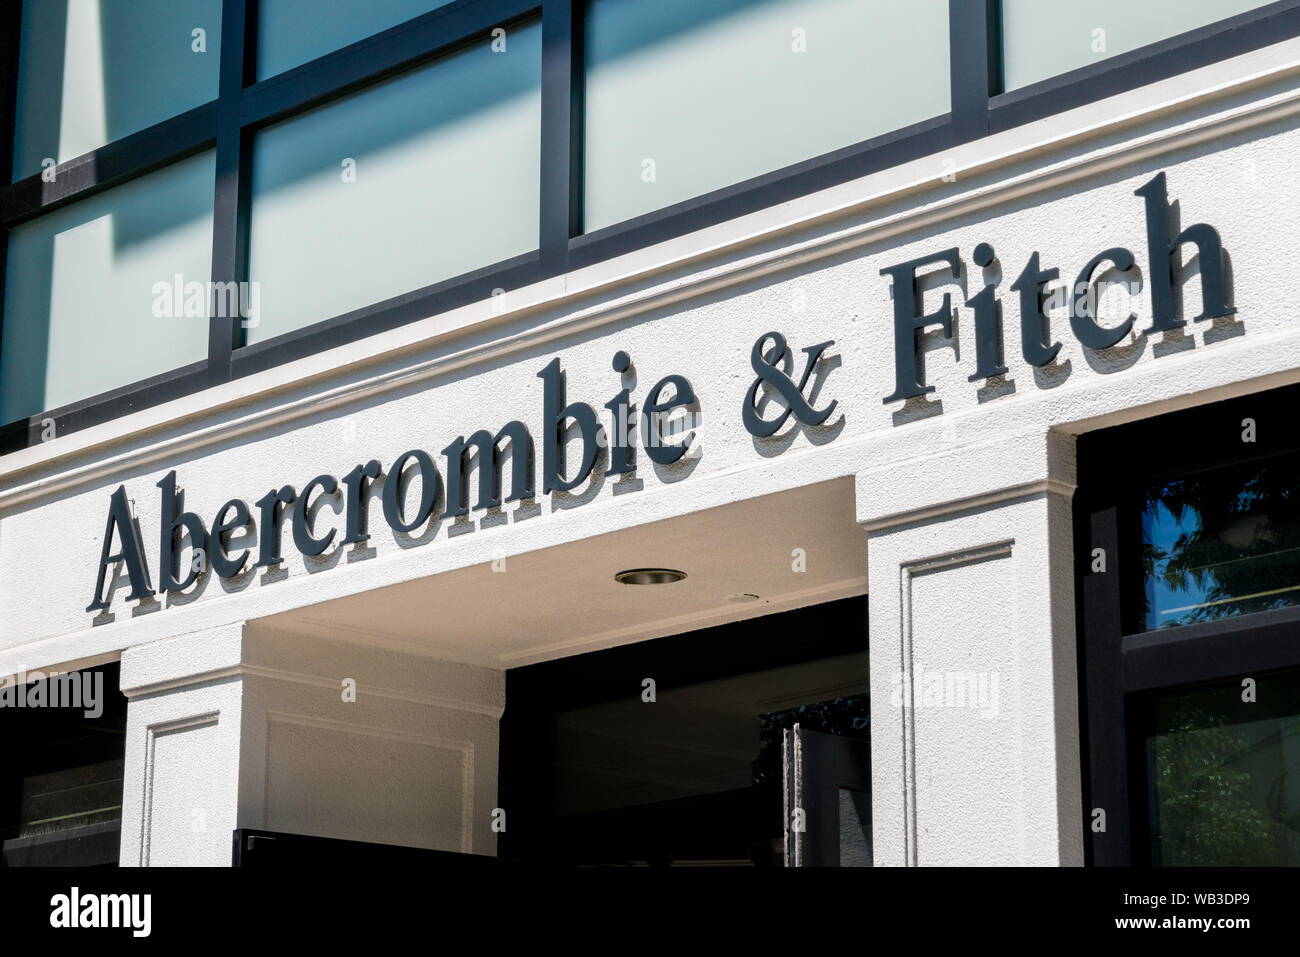 abercrombie and fitch stanford